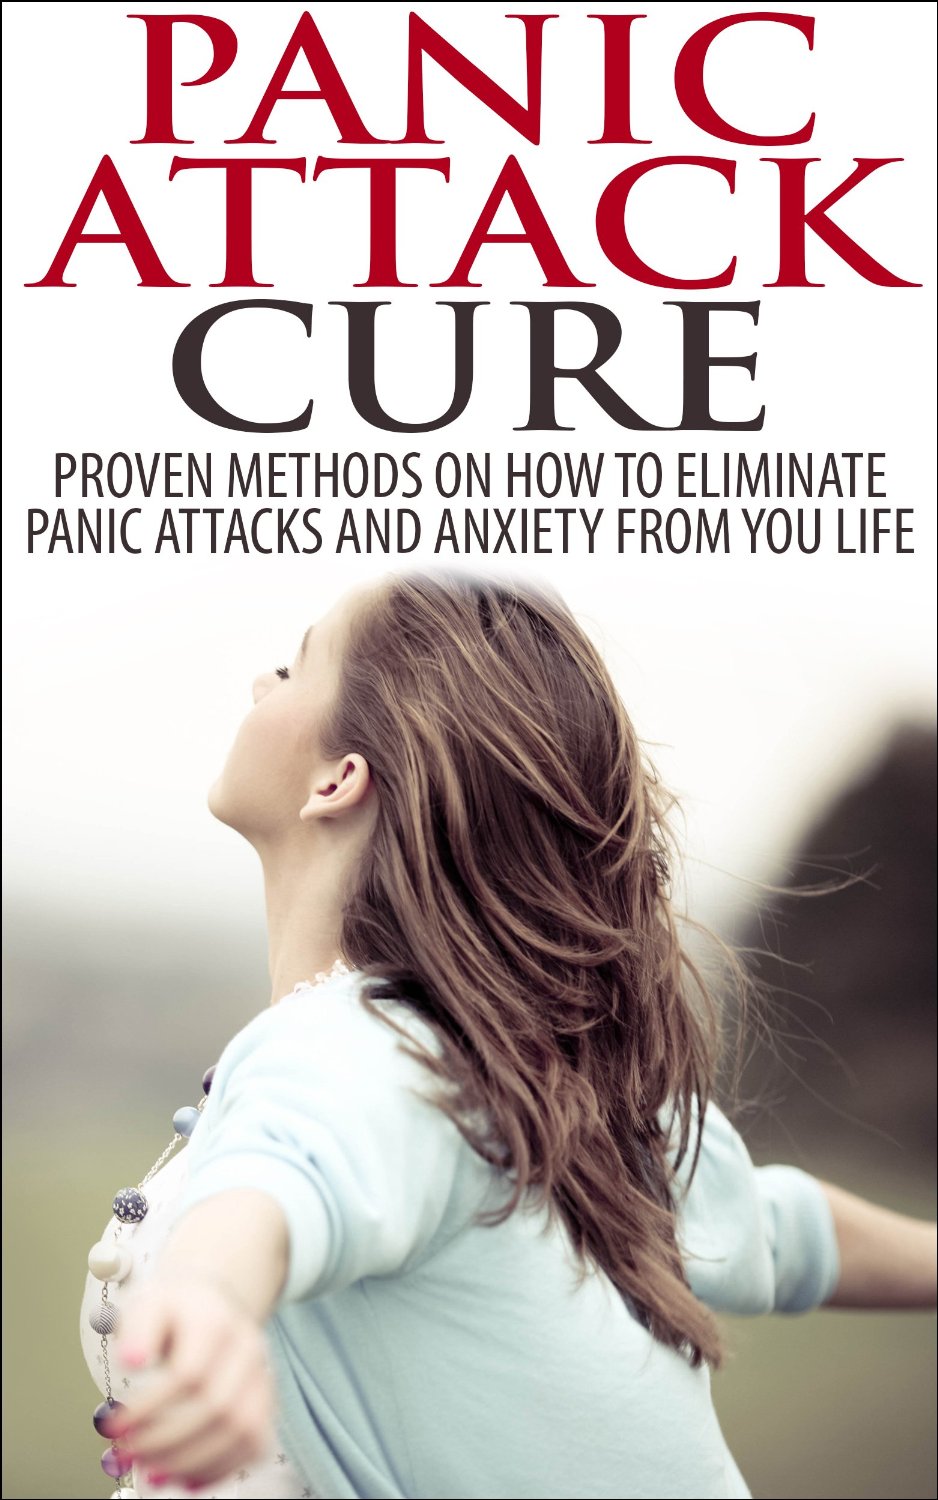 Panic Attack Cure: Proven Methods on How To eliminate Panic Attacks And Anxiety From You Life (Panic Attack, Anxiety, Anxiety Cure, Natural Cure, Self Help) by Jim Hall